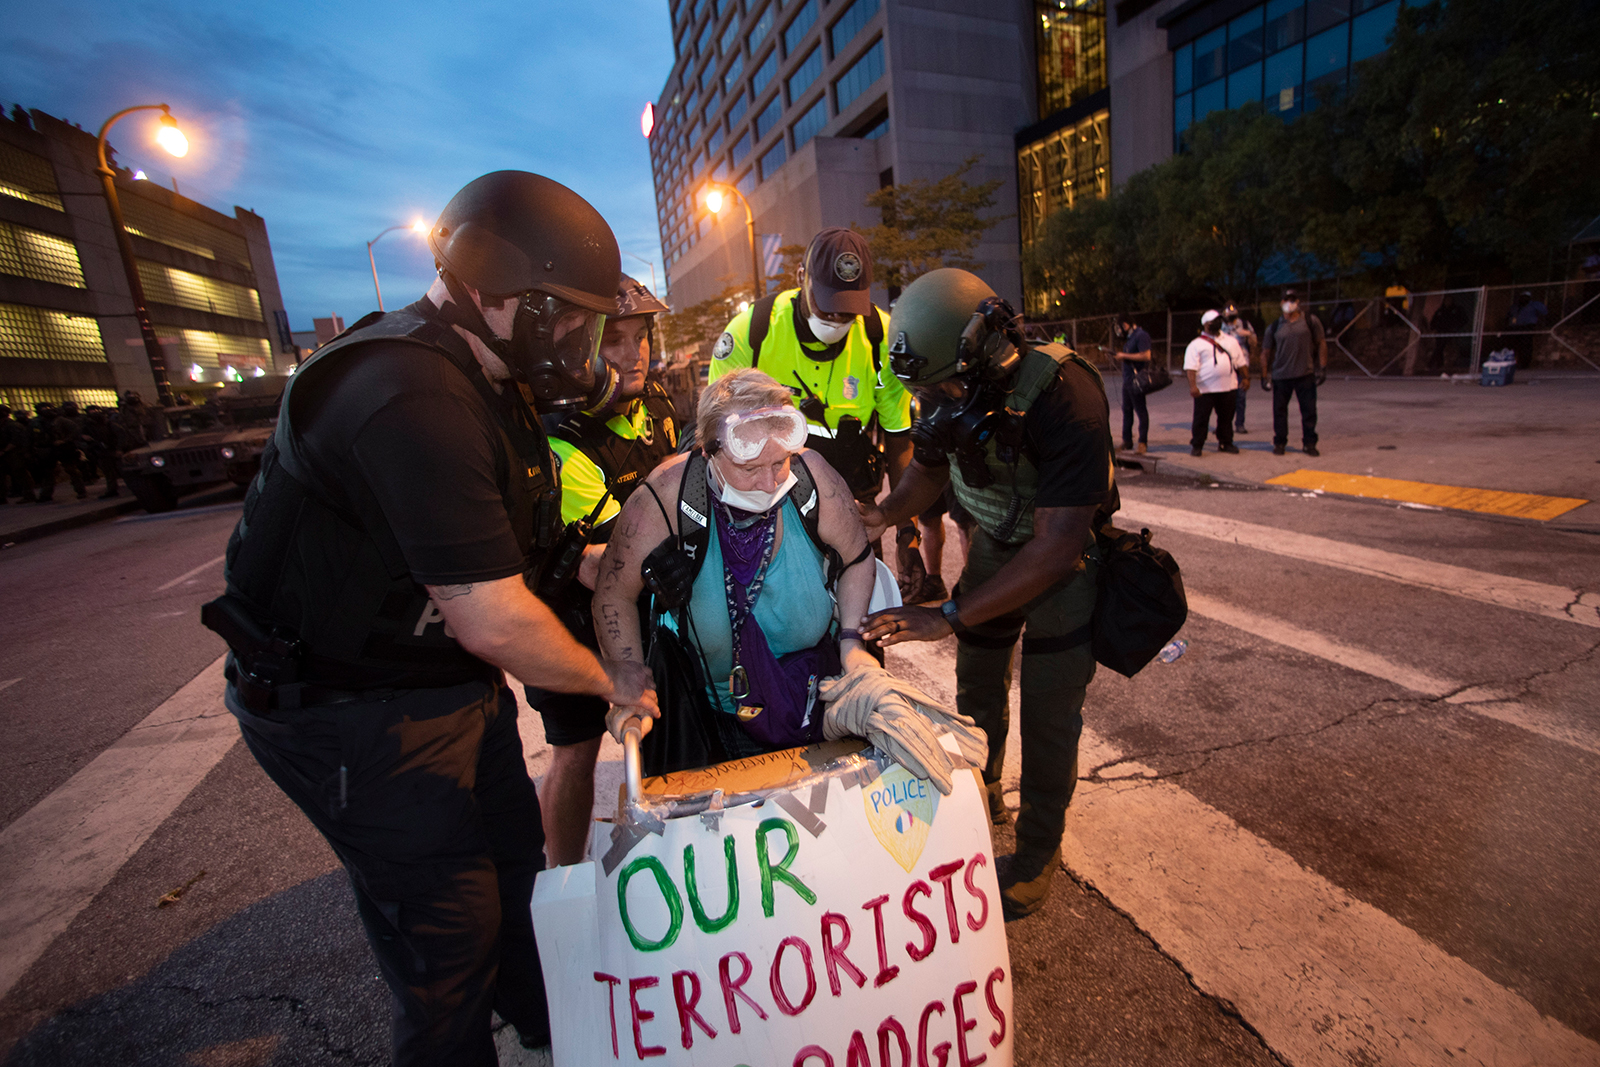 A woman is helped to her feet by police officers after she agreed to stop blocking a street during a protest, on June 3, in Atlanta.